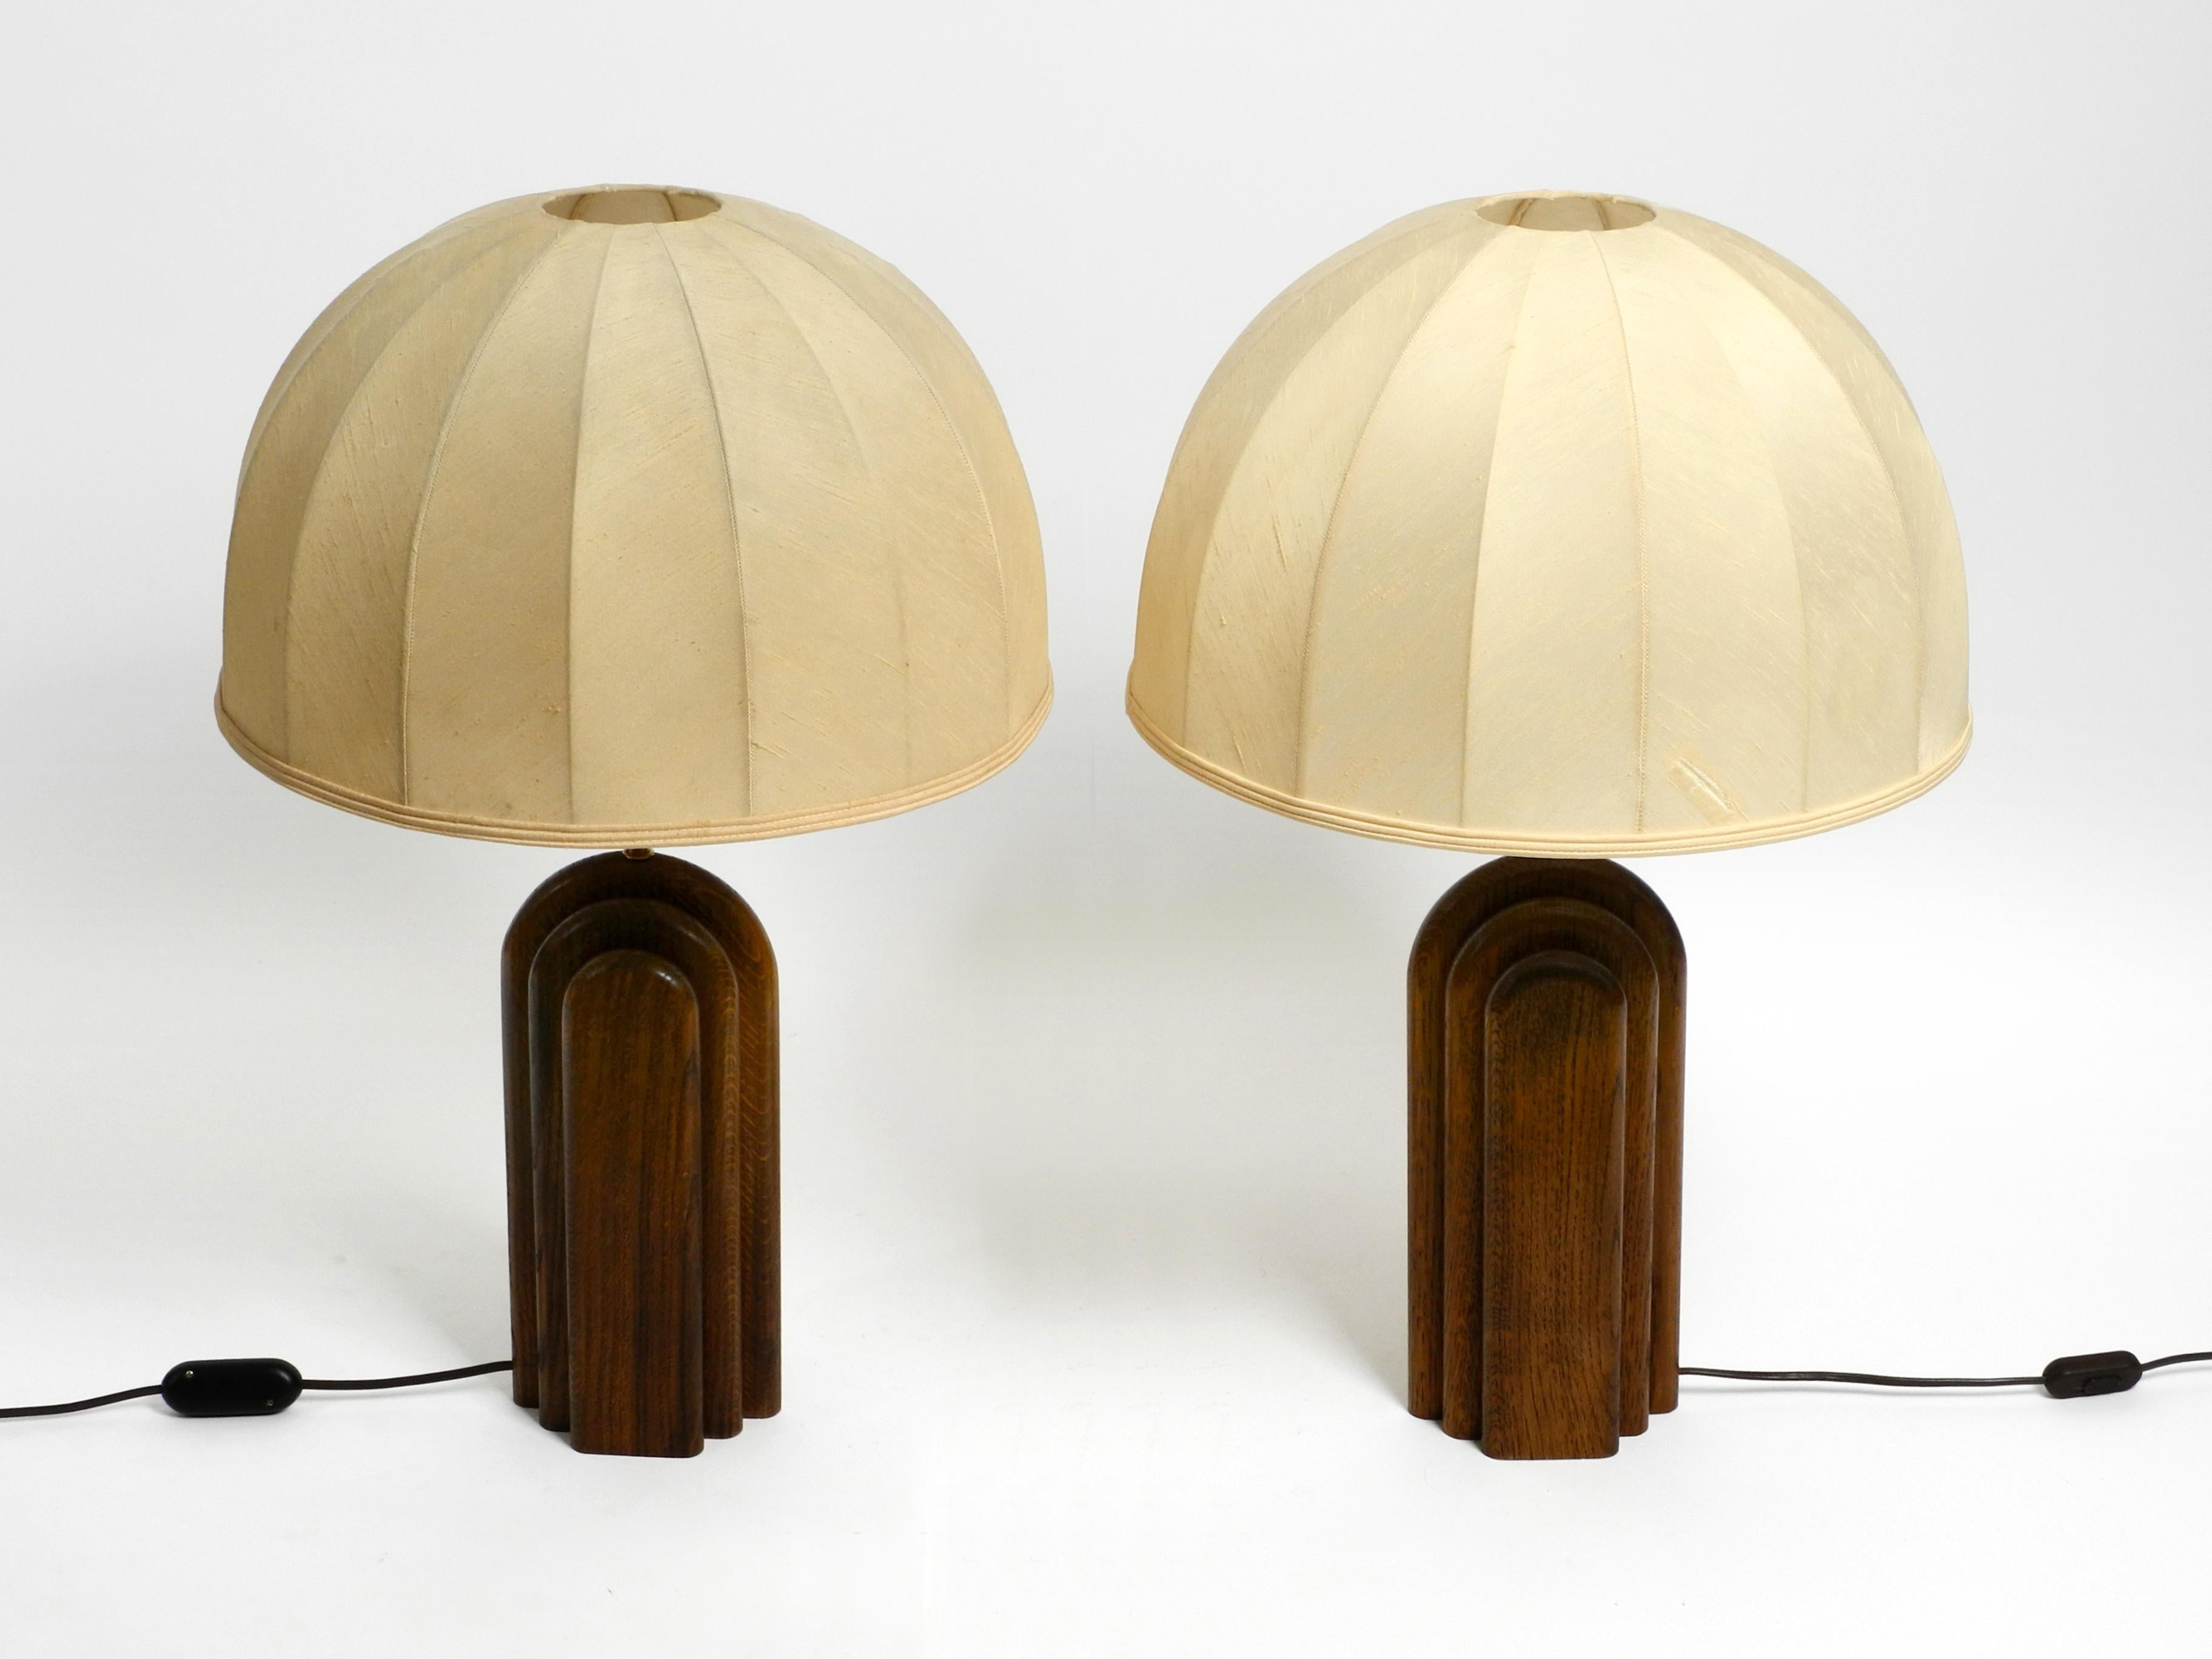 Pair of large, exceptional 1960s table lamps by Temde. Made in Switzerland.
Solid teak frame in Art Deco style.
The large original shades are made of wild silk.
One shade has been repaired in two places.
The shades can also be newly